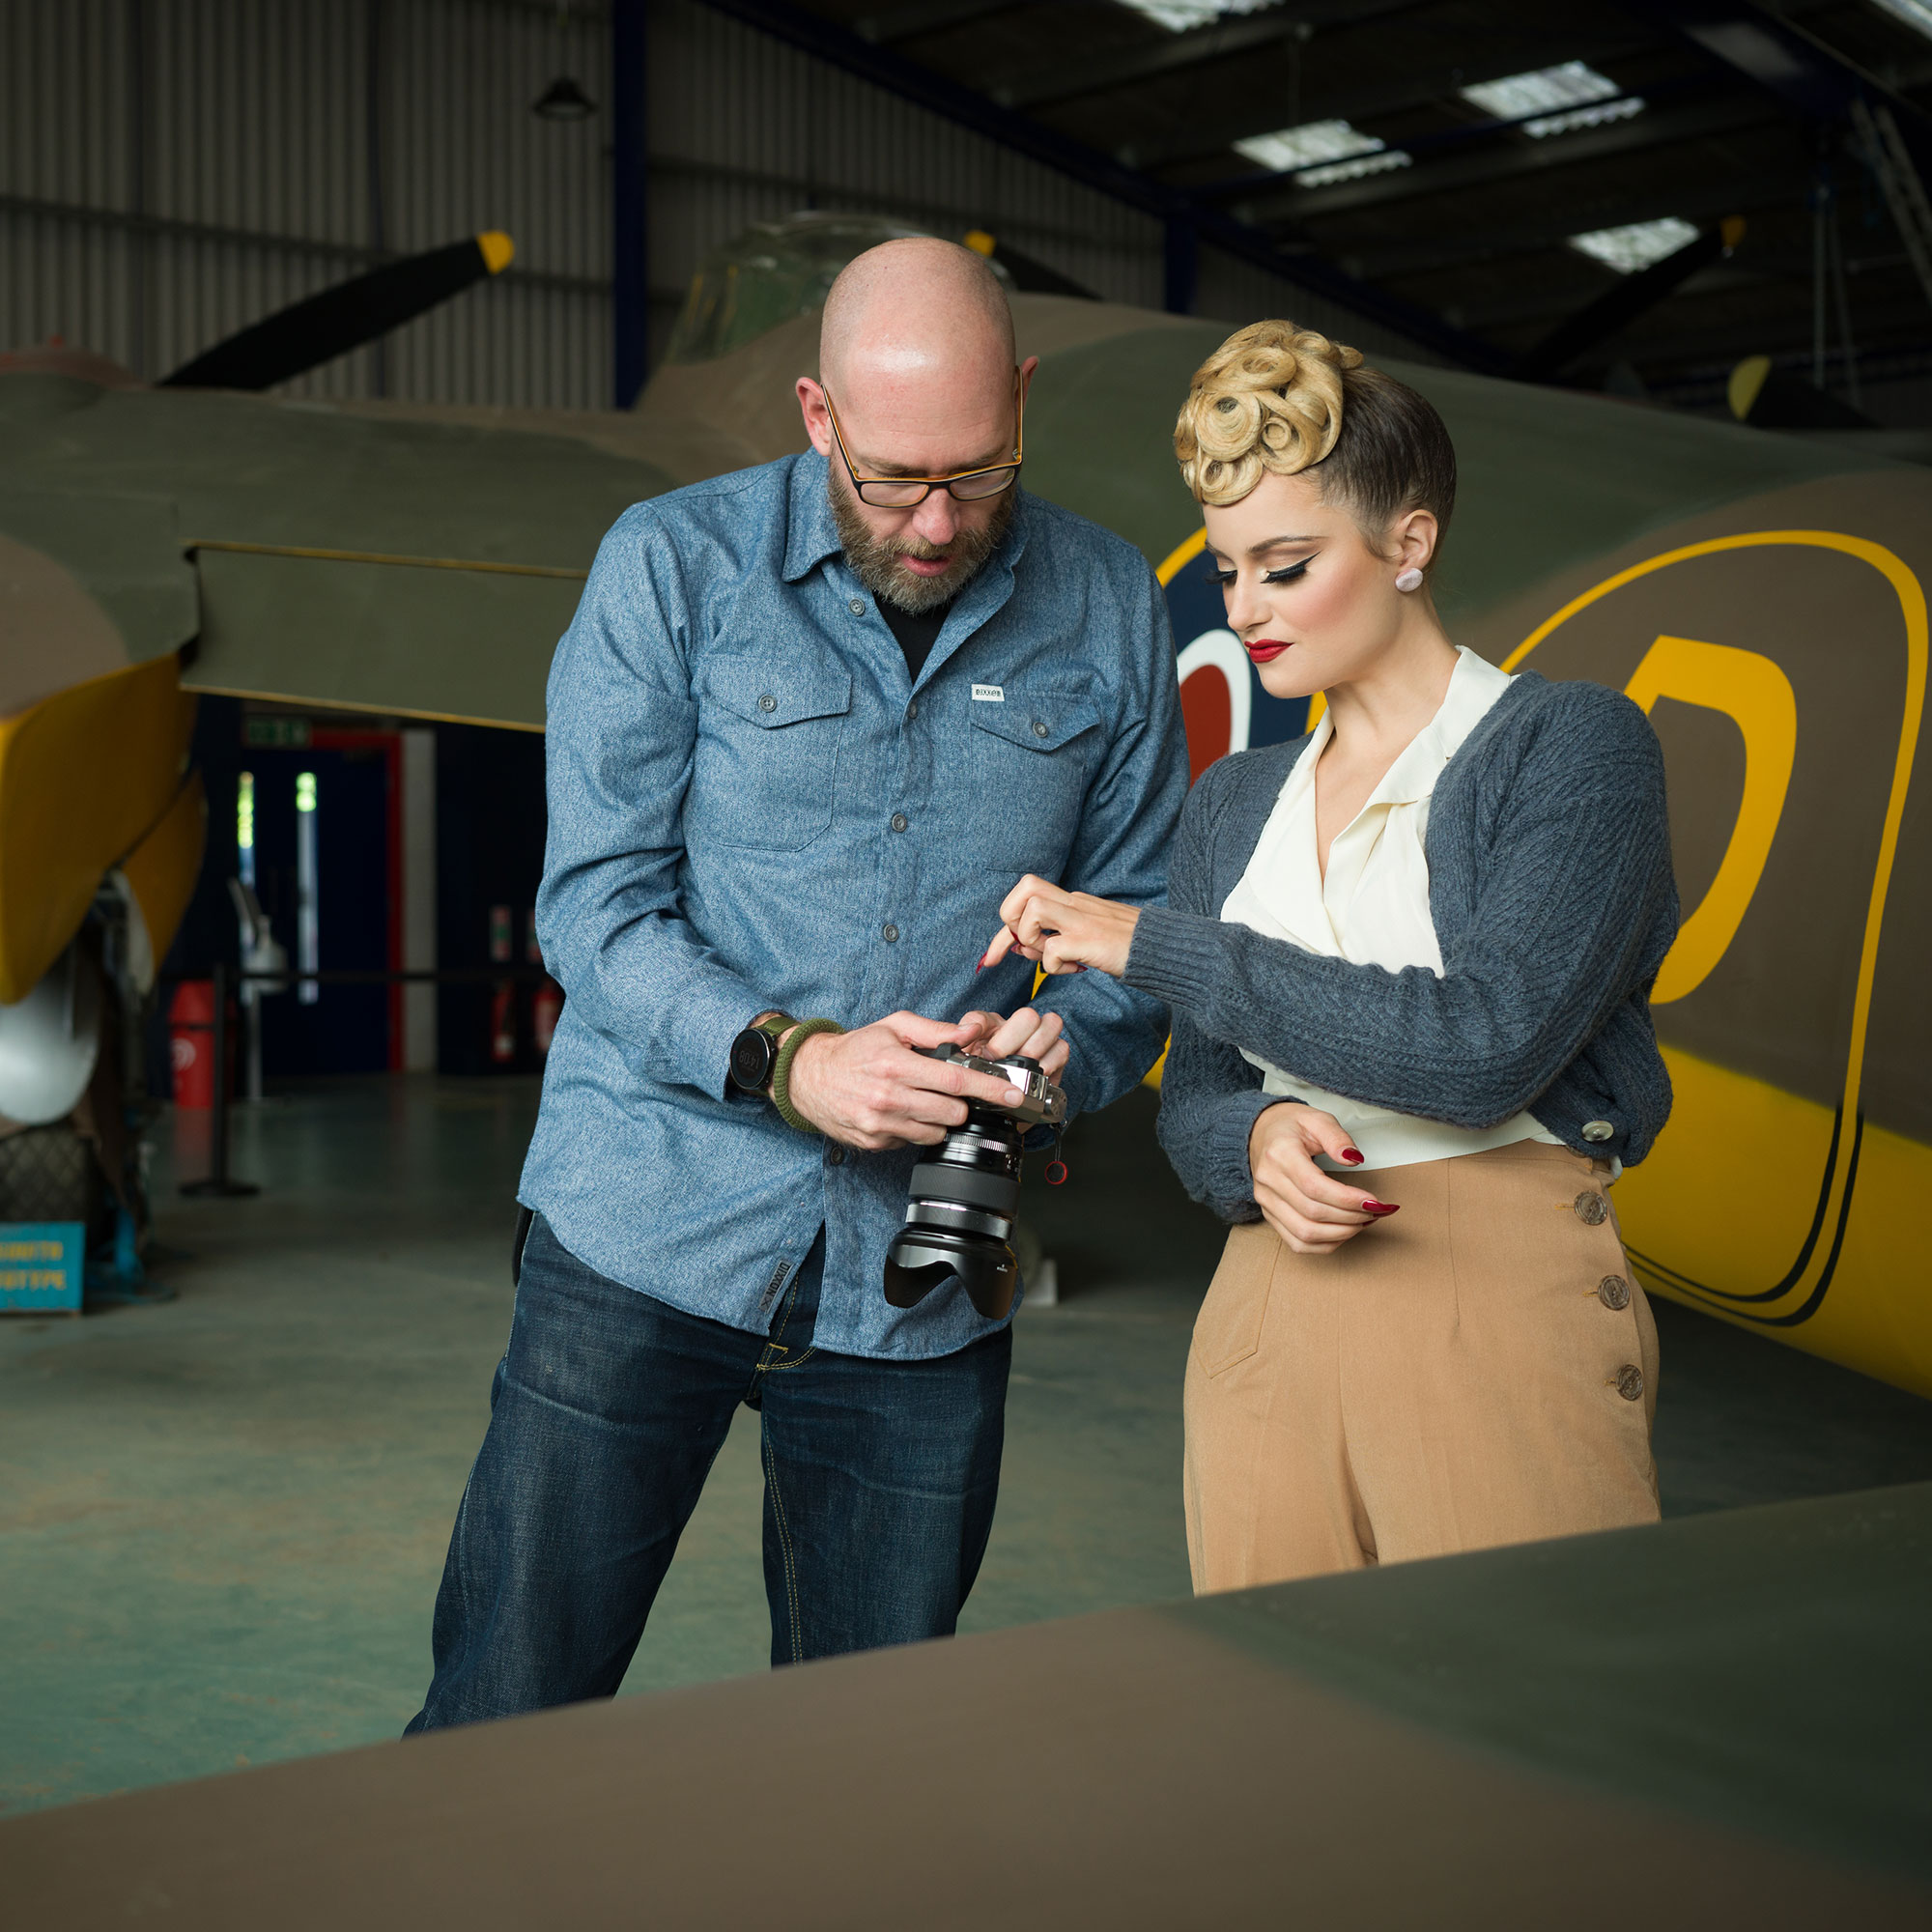 Vintage Pinup felicity Furore poses for Pinup Photography Workshop with original de Havilland Mosquito prototype © Tigz Rice Ltd 2022. https://www.tigzrice.com